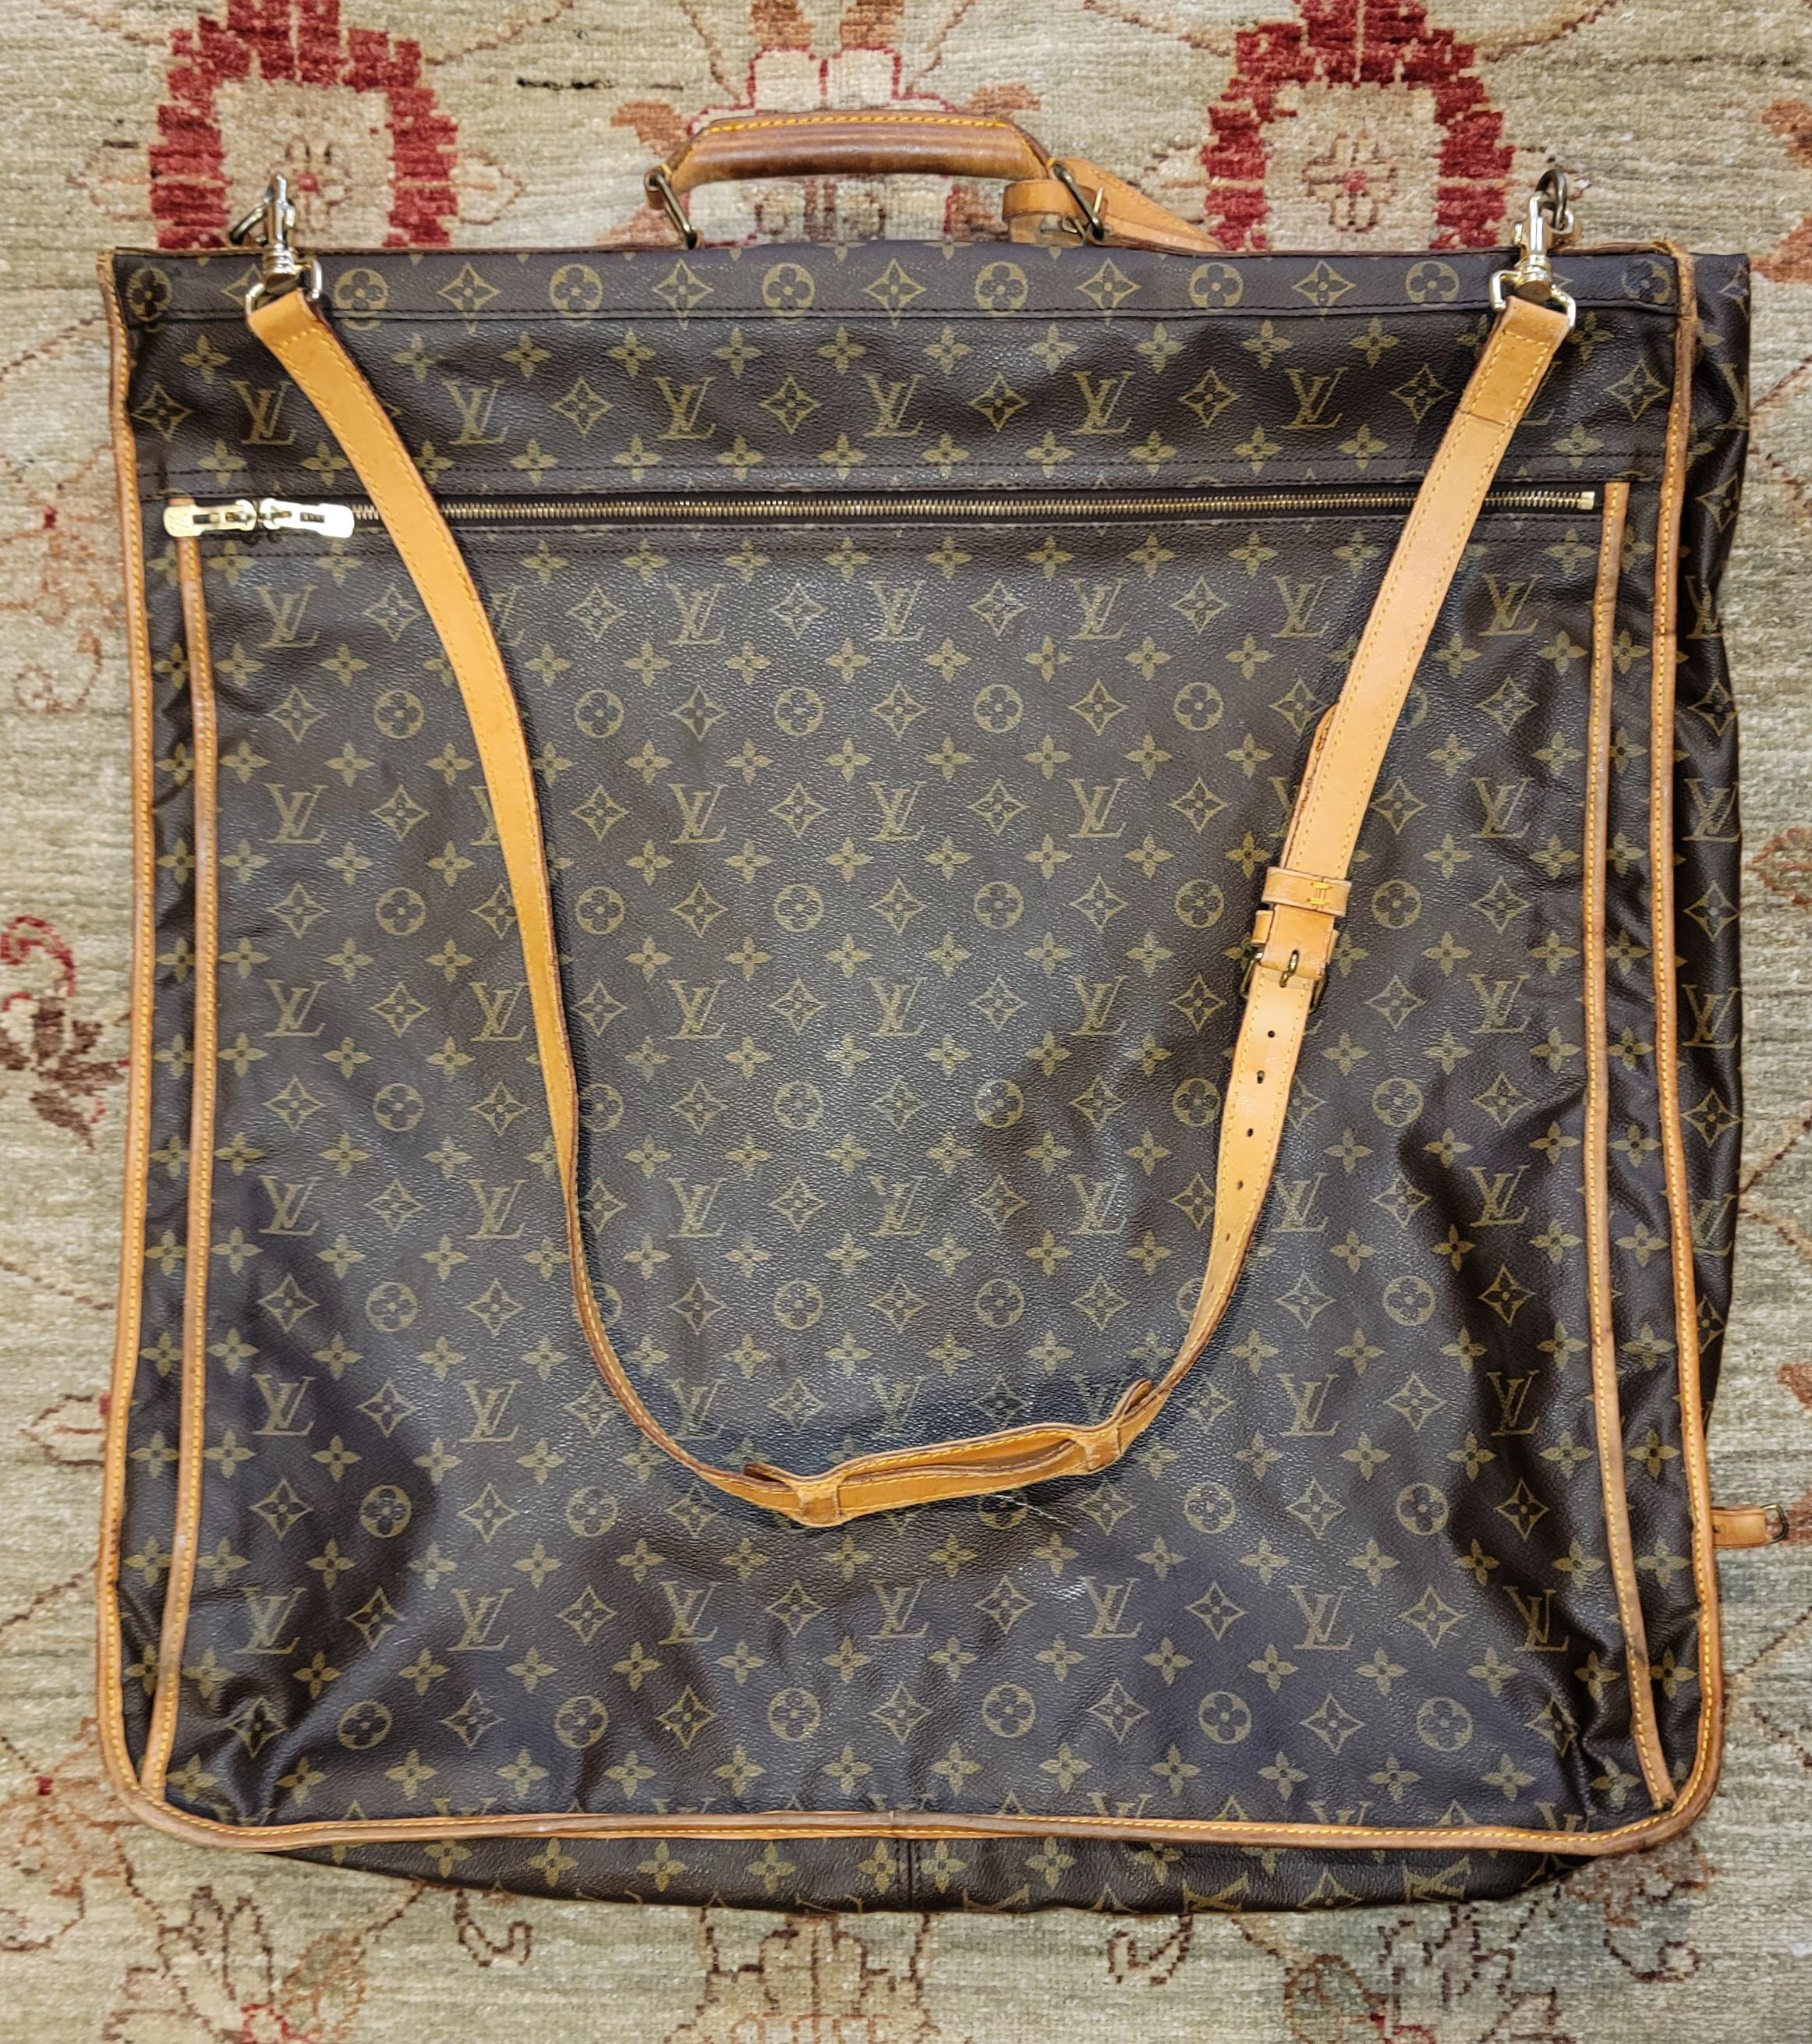 Louis Vuitton Monogram Garment Luggage Carrying Bag with 2 hangars.There is a hook on the bottom of the bag when opened can hang in a closet. Easily opened and cloths exposed when laying down to pull cothes out.LV leather straps and buckles on the